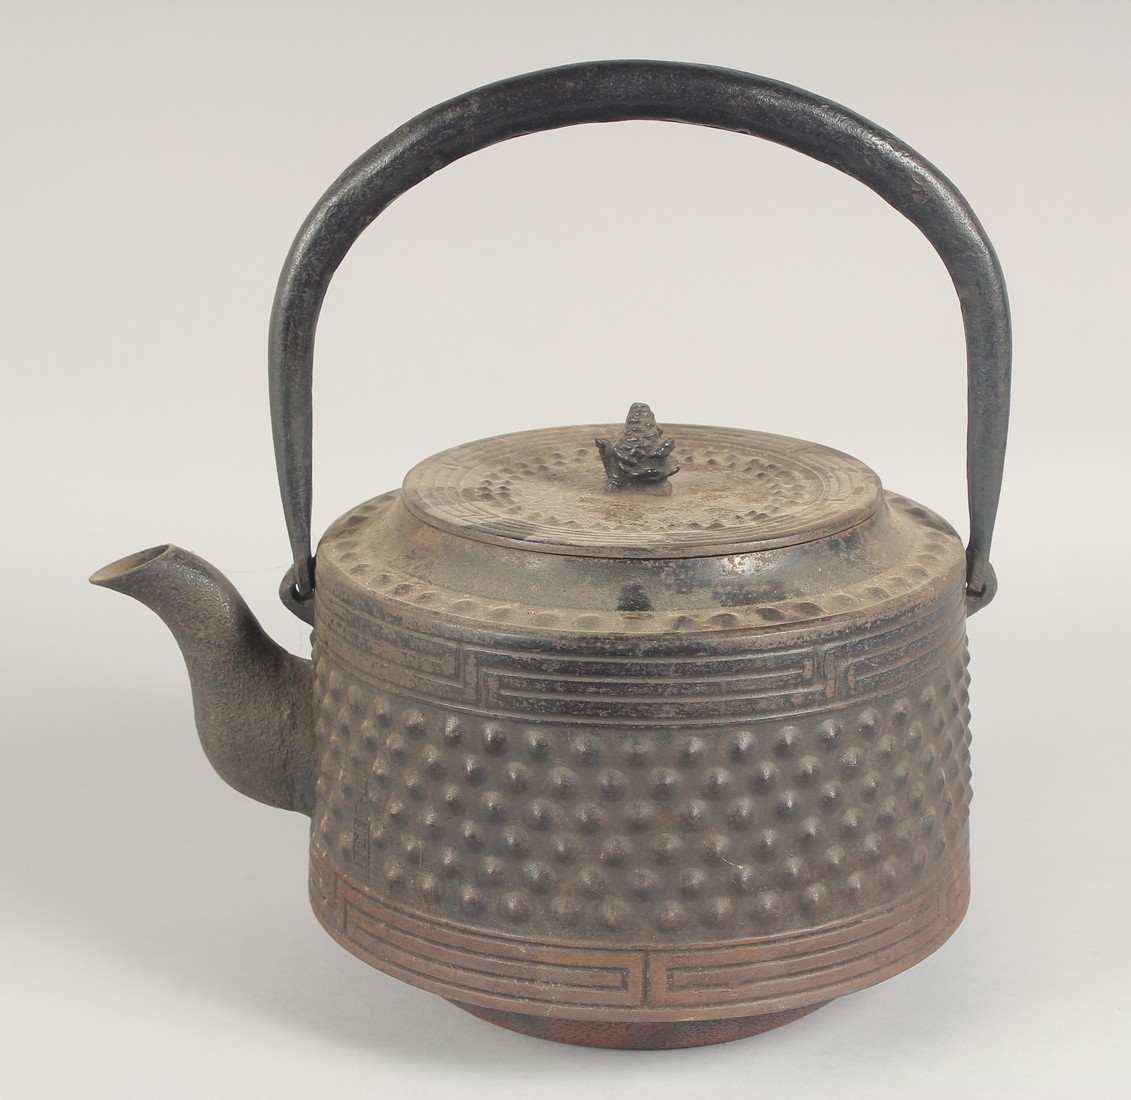 A LARGE 19TH CENTURY JAPANESE CAST IRON TETSUBIN / KETTLE, designed with bands of raised bosses,